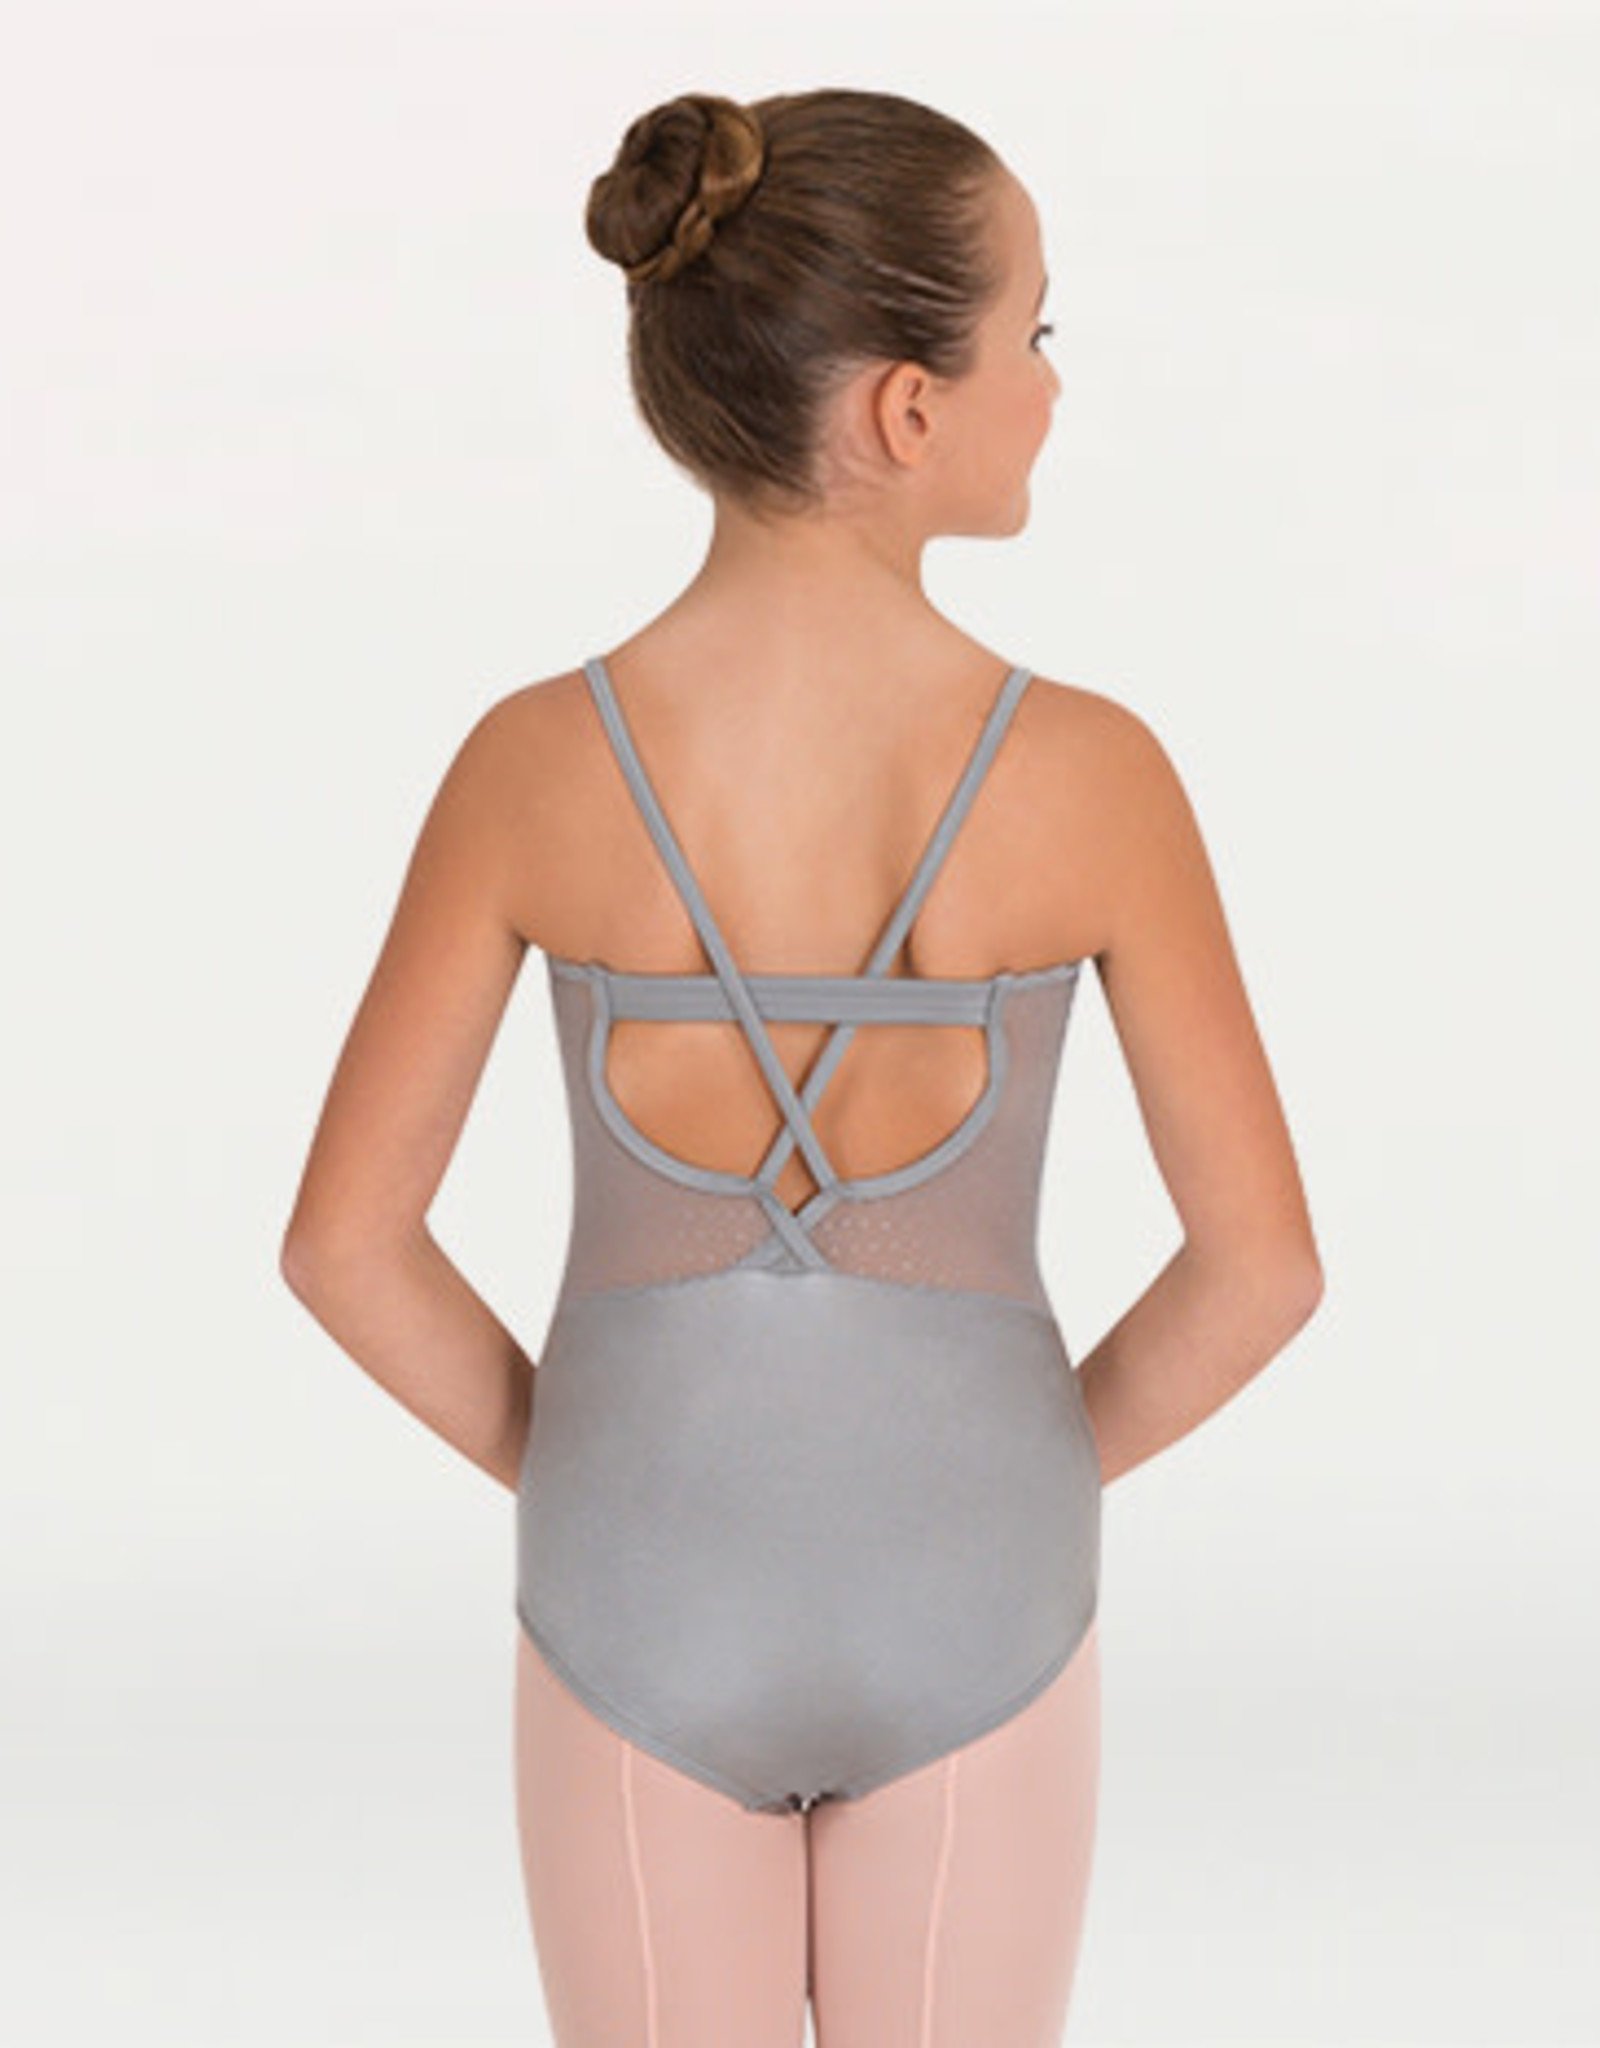 Body Wrappers Body Wrappers Tyler Peck Designs Leotard P1182